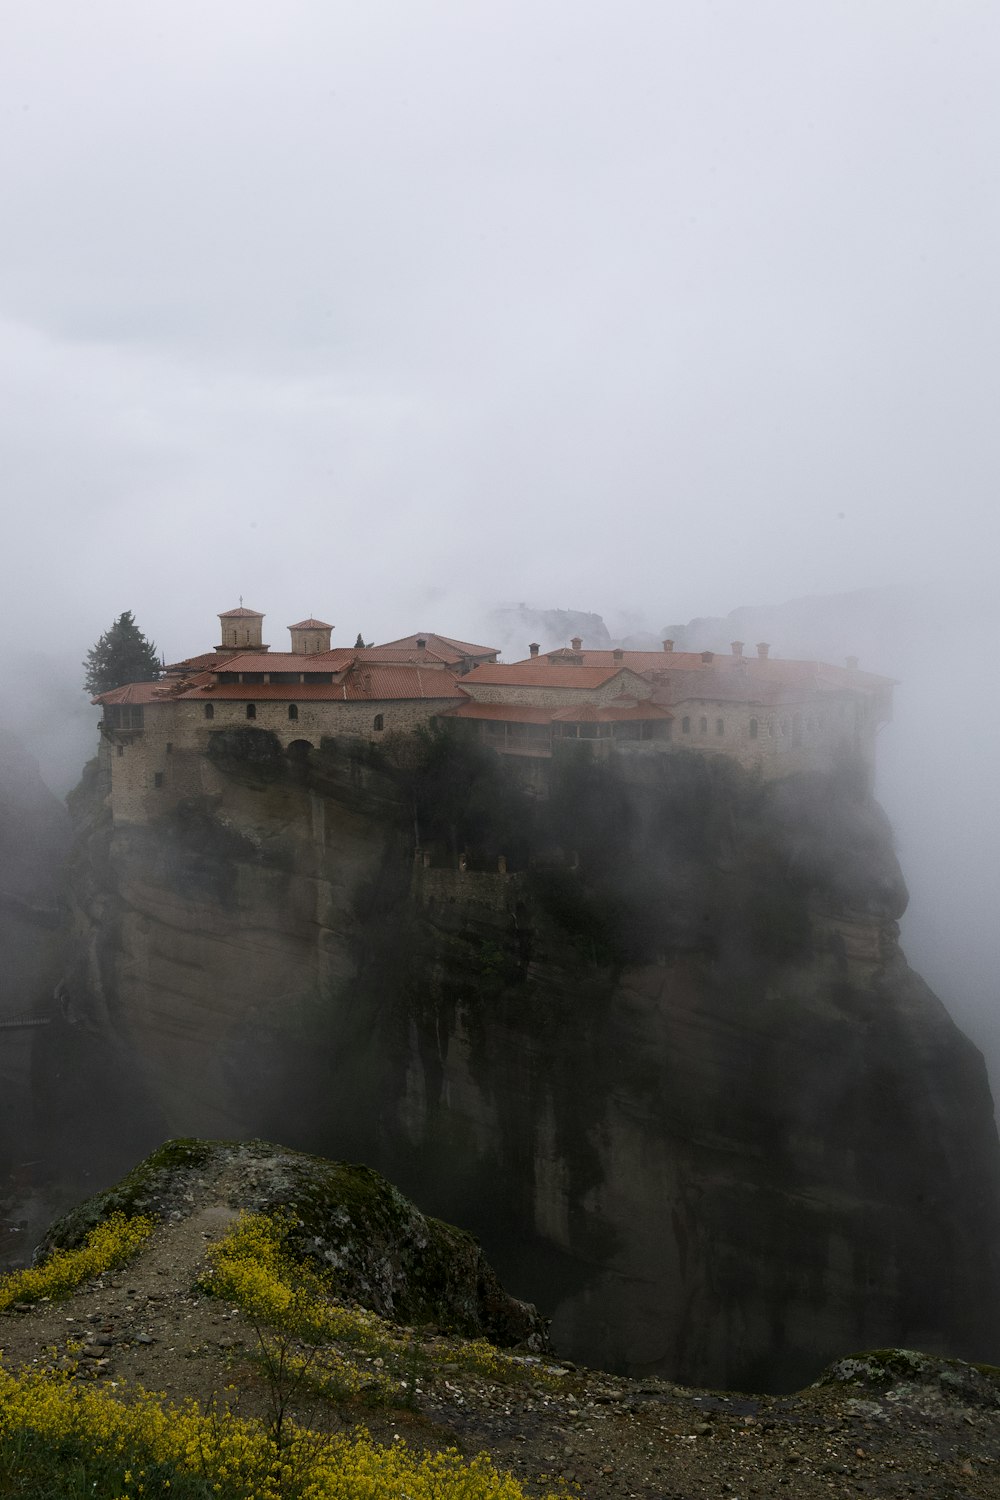 a castle perched on top of a cliff surrounded by fog